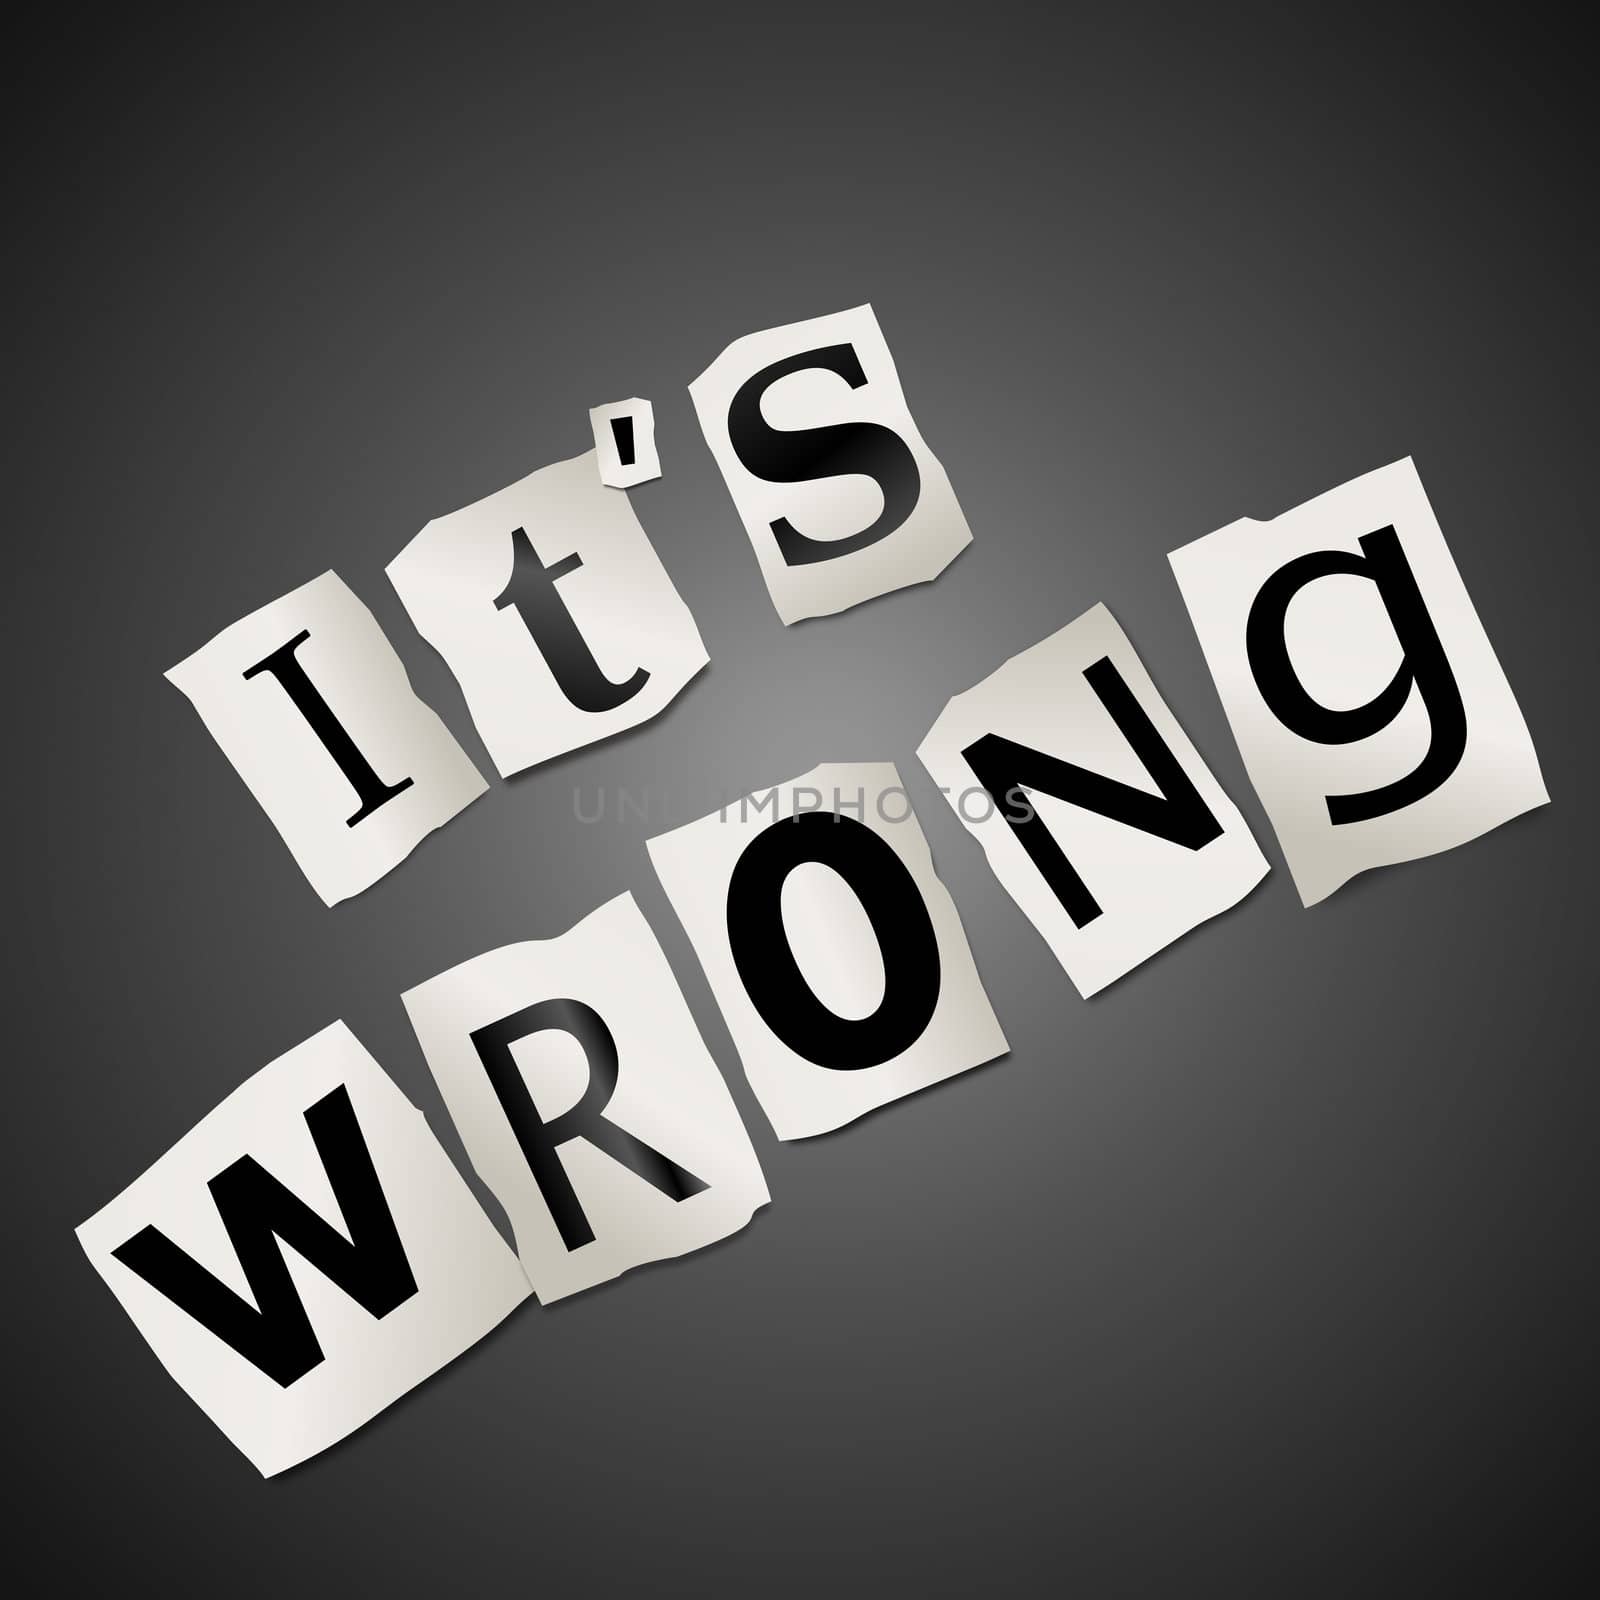 Illustration depicting cutout printed letters arranged to form the words you are wrong.